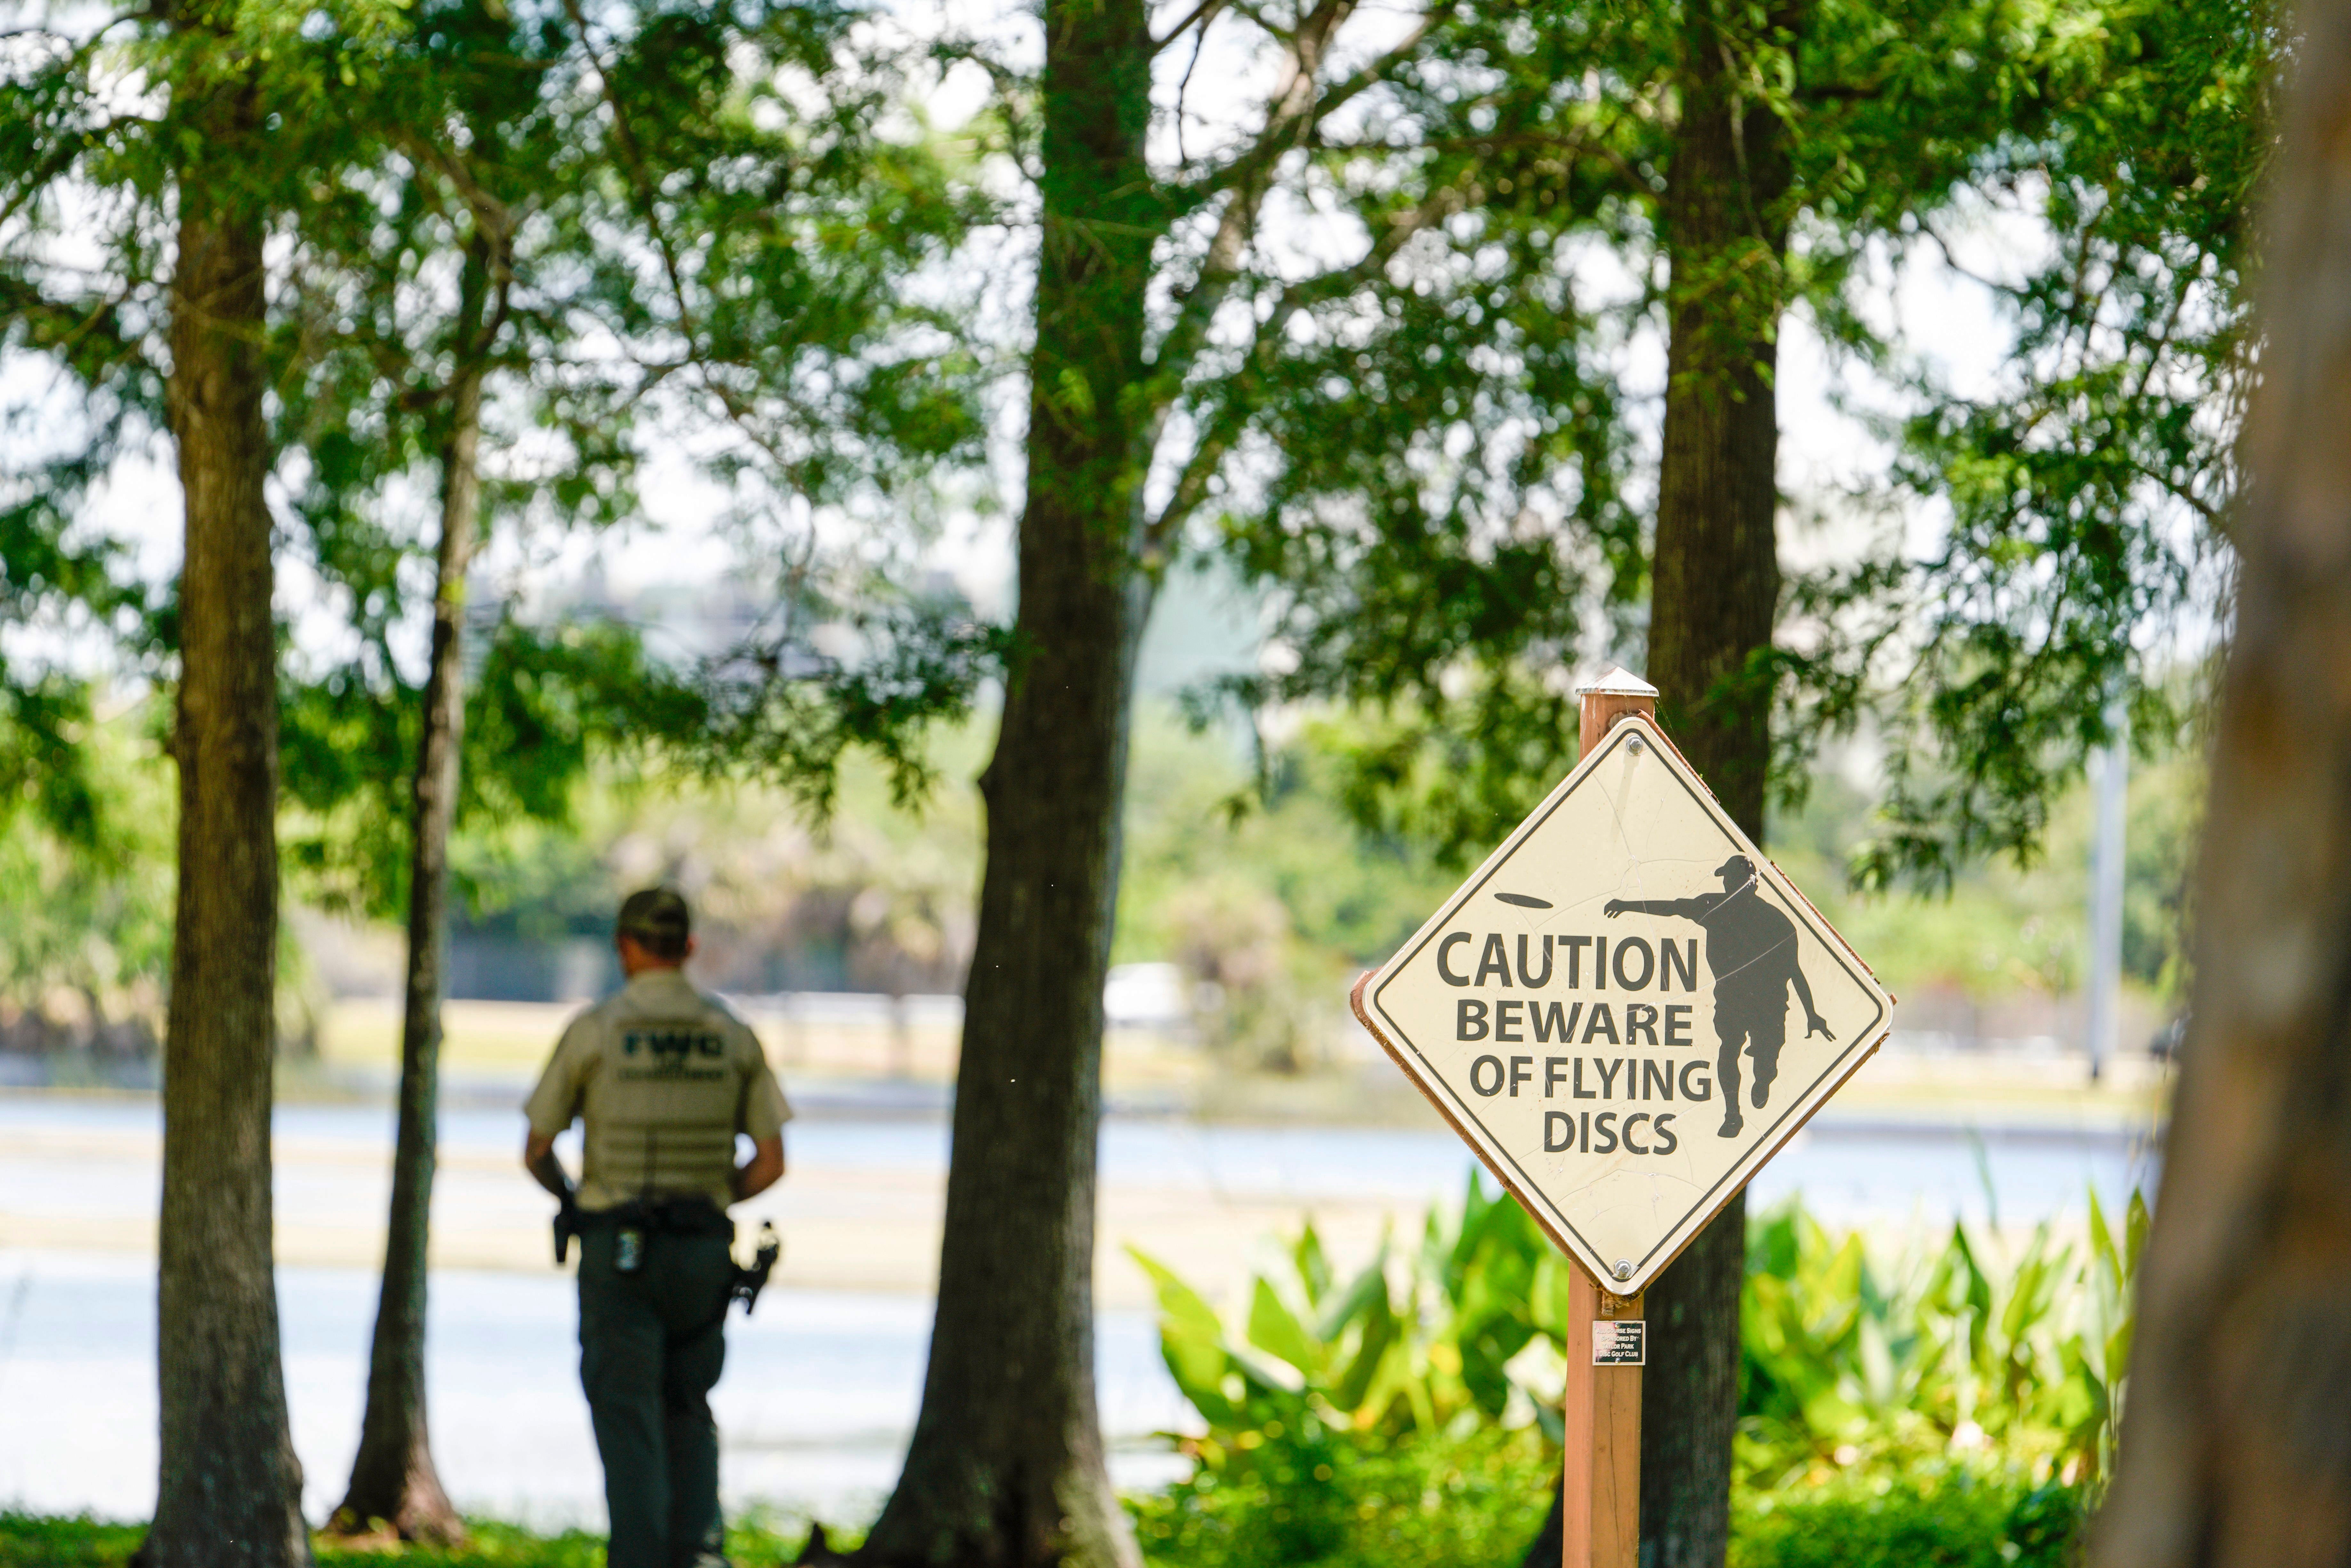 A Florida Fish and Wildlife Conservation Commission officers stands by a lake in John S. Taylor Park, where a man was found dead Tuesday, May 31, 2022, in Largo, Fla